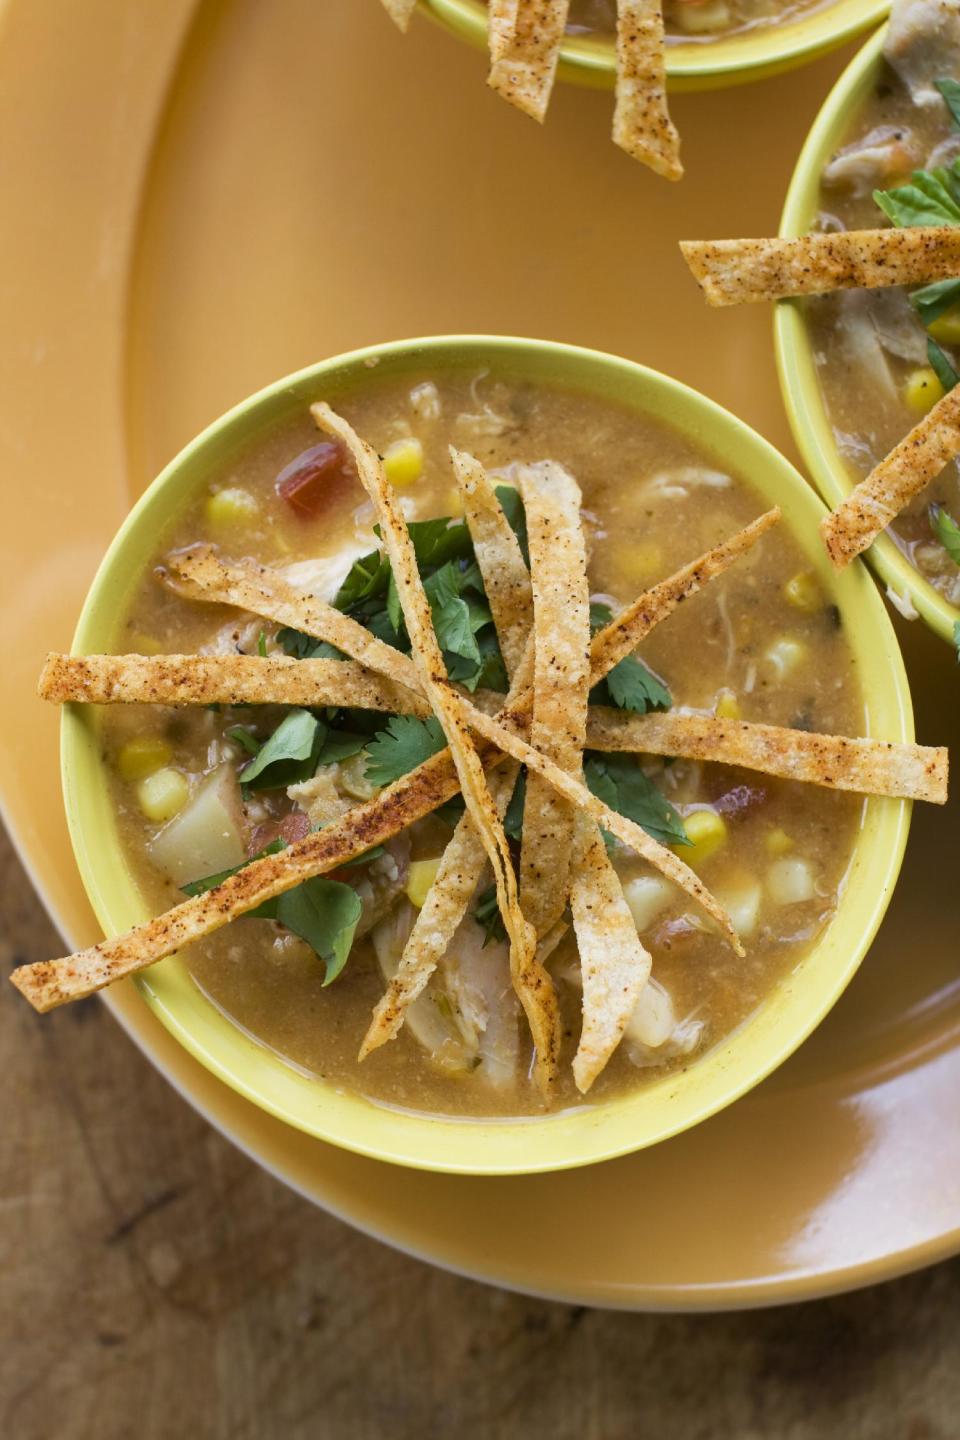 In this image taken on July 8, 2013, southwestern corn and chicken chowder with tortilla crisps is shown in Concord, N.H. (AP Photo/Matthew Mead)